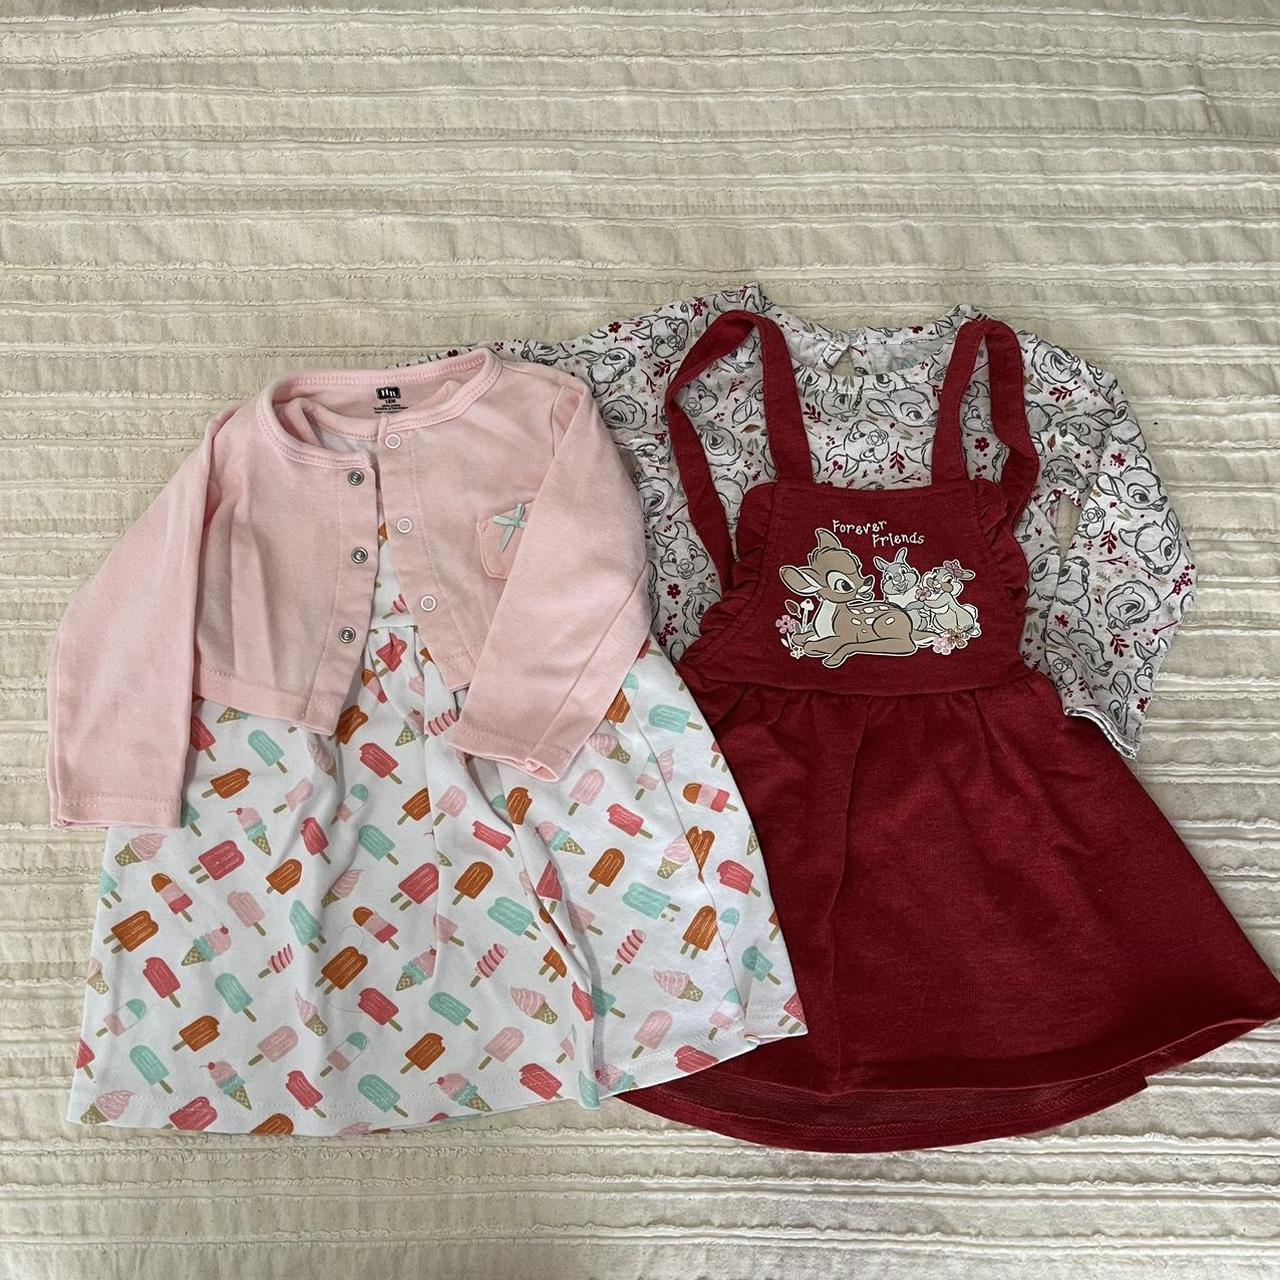 MIX & MATCH: 5 ITEMS FOR $40, FROM ITEMS MARKED - Depop